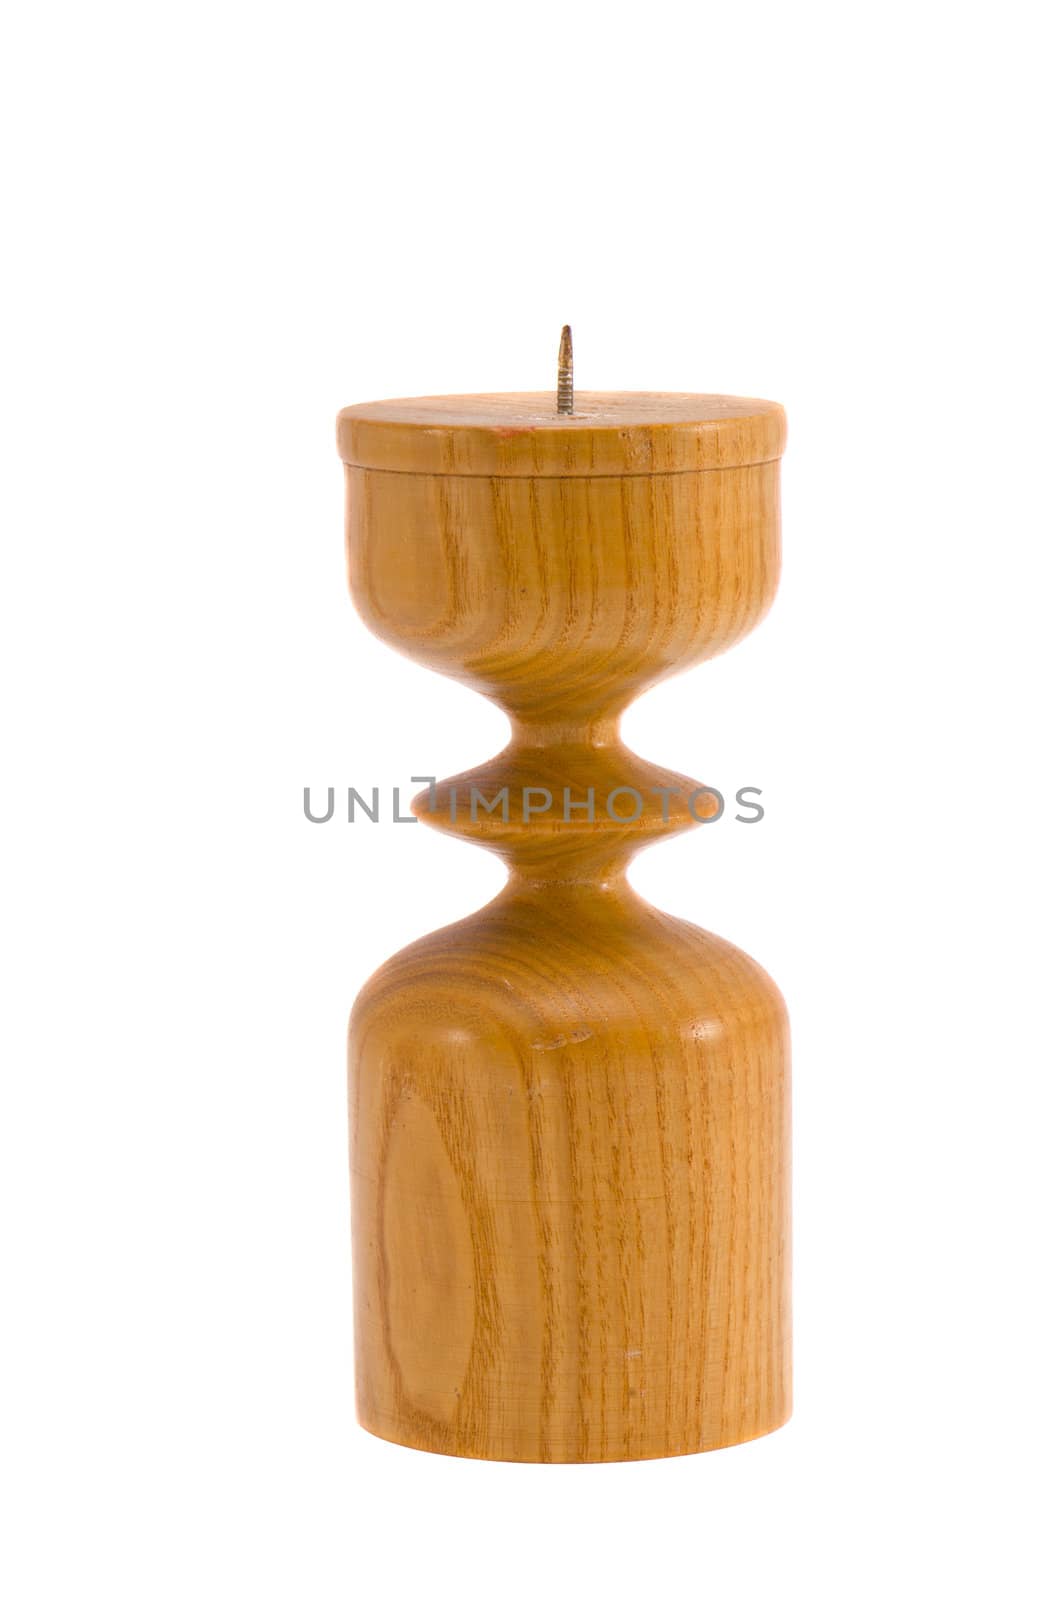 isolated wooden candlestick by alis_photo